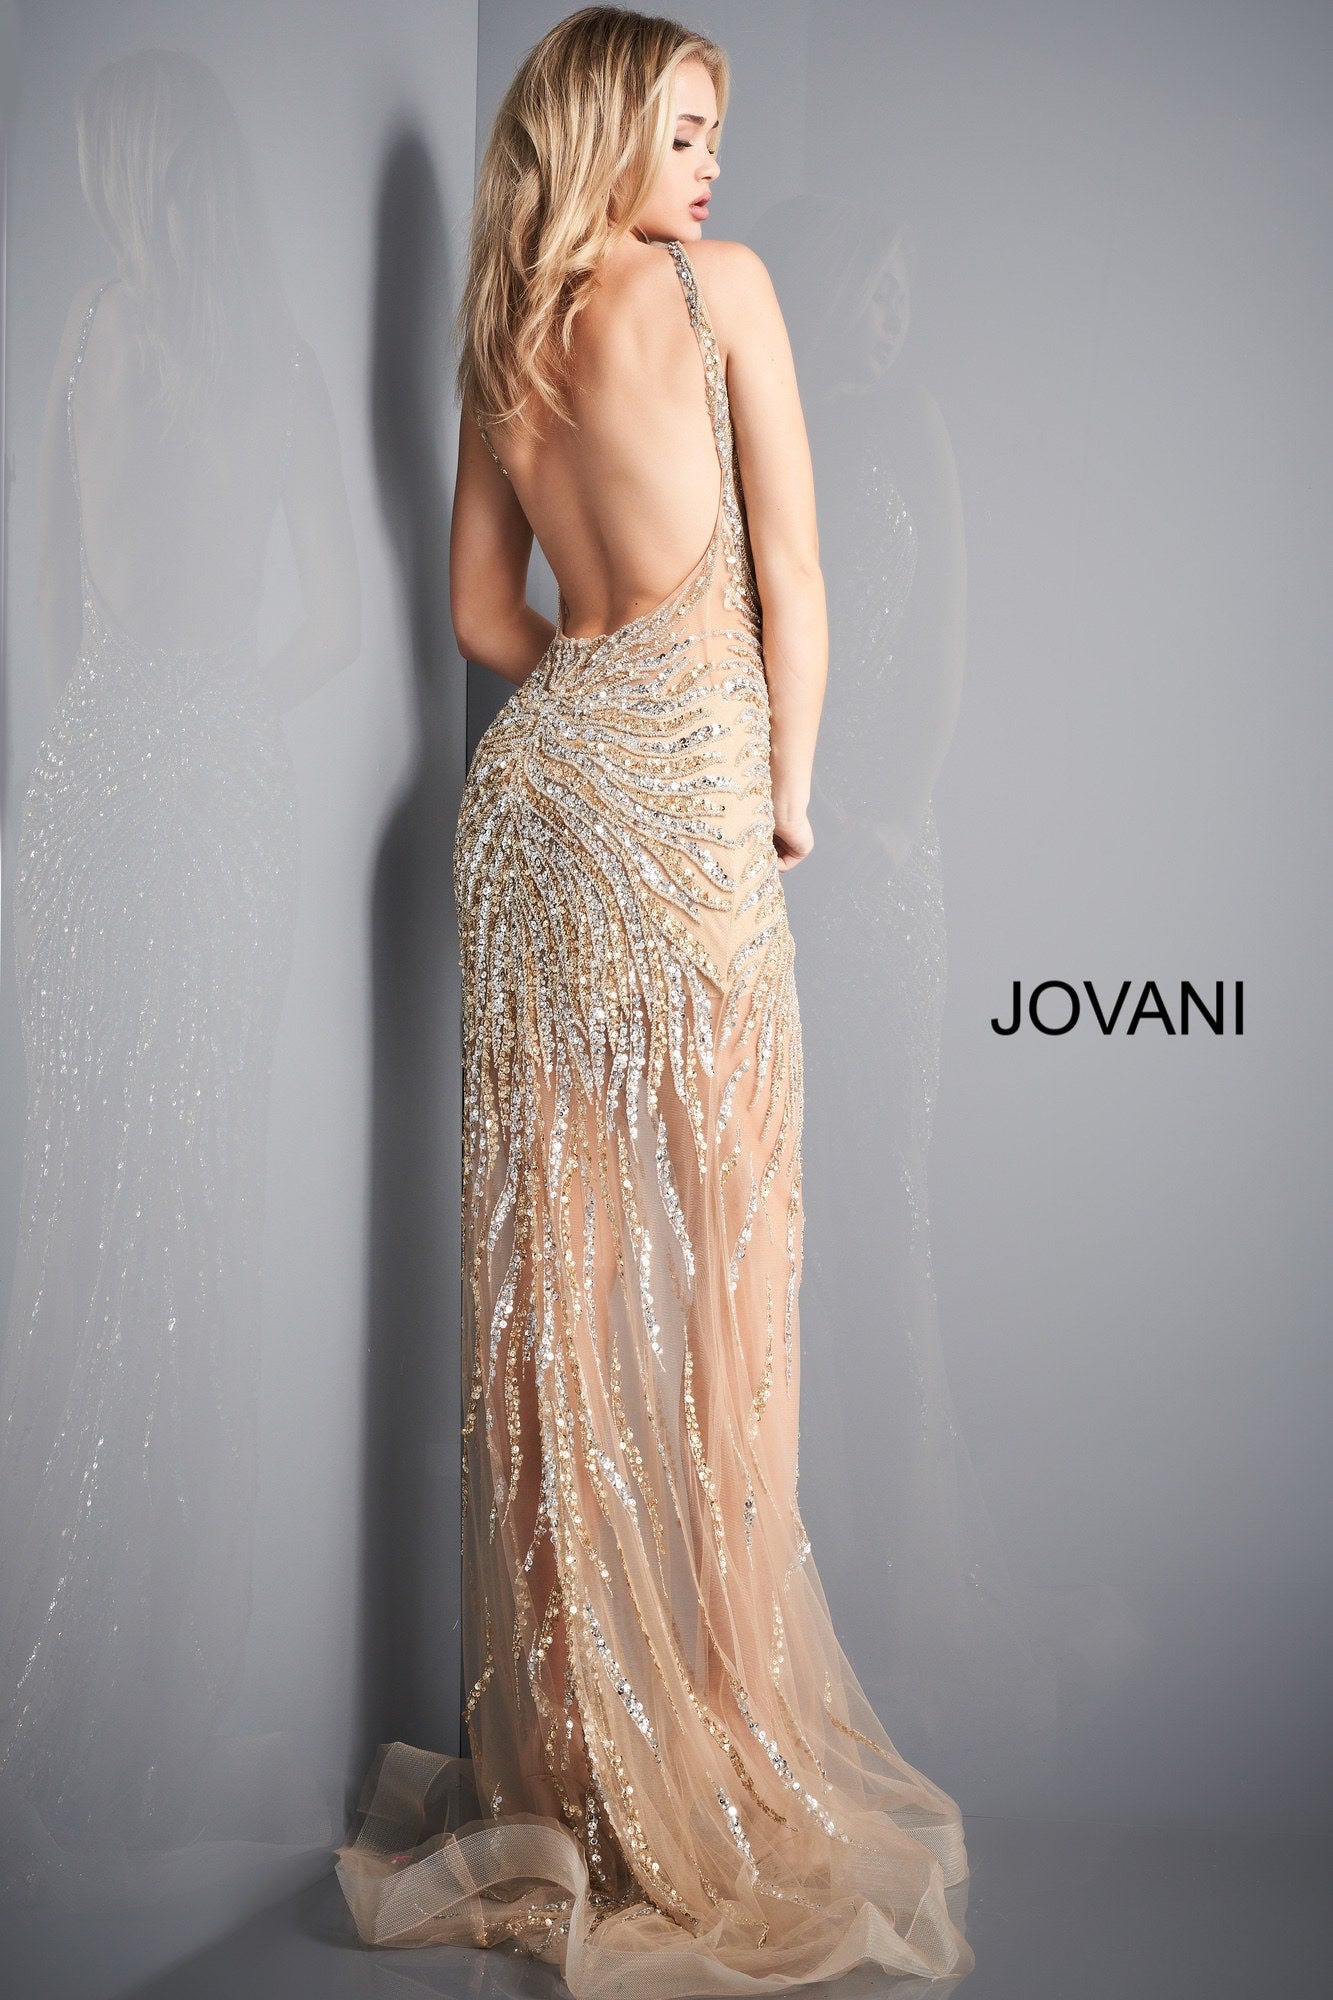 Jovani 02504 is a long fitted formal evening gown. V neckline with an open back. This Backless formal evening gown Features a fully Embellished & Beaded design with sequins cascading down into the sheer long trumpet skirt with horse hair trim. Fitted sheer bodice with cascading asymmetrical embellishments for a flattering fit. Sweeping train. This is a sexy style for any Formal Event! Available Sizes: 00,0,2,4,6,8,10,12,14,16,18,20,22,24  Available Colors: Burgundy, Light Blue, Gold/Silver